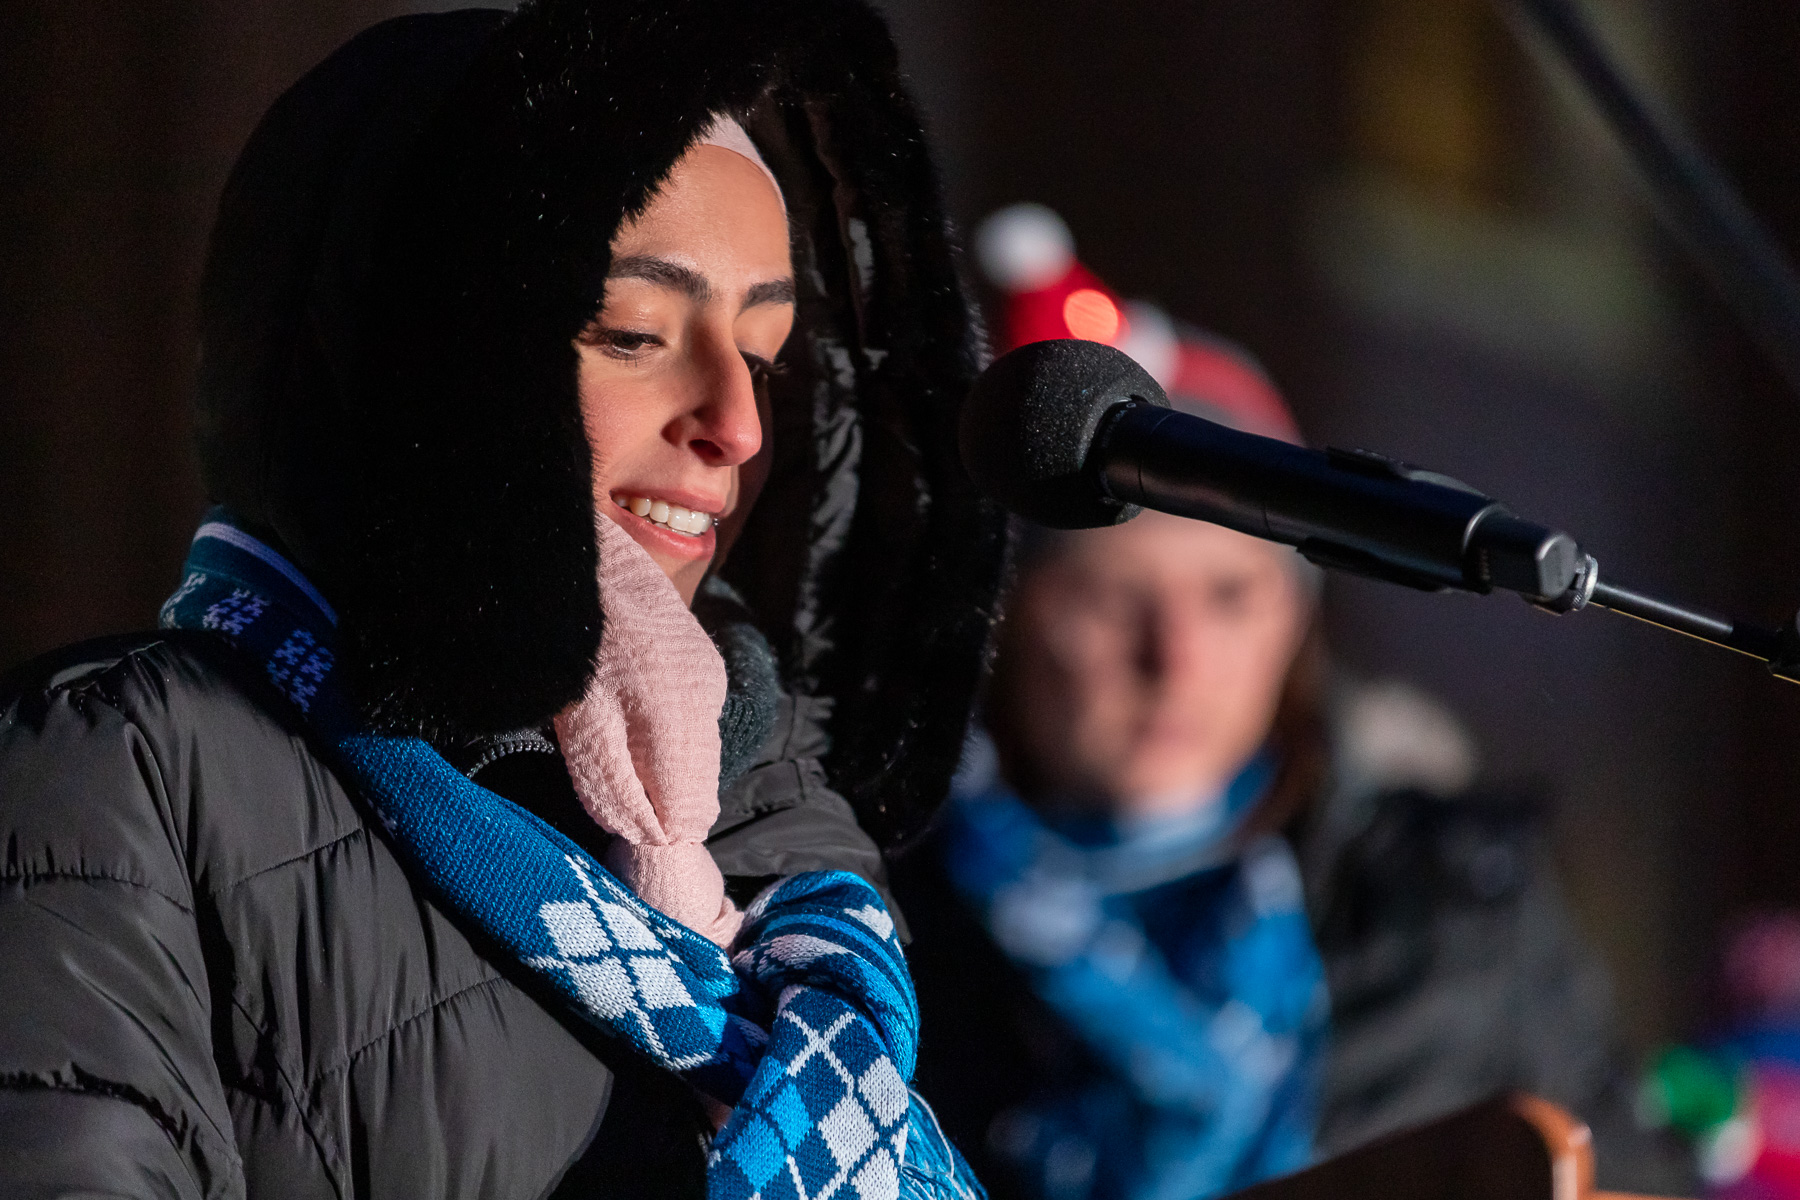 Watfae Zayed, a sophomore majoring in neuroscience, member of the Student Government Association and United Muslims Moving Ahead, served as student emcee for the event. (DePaul University/Jeff Carrion)